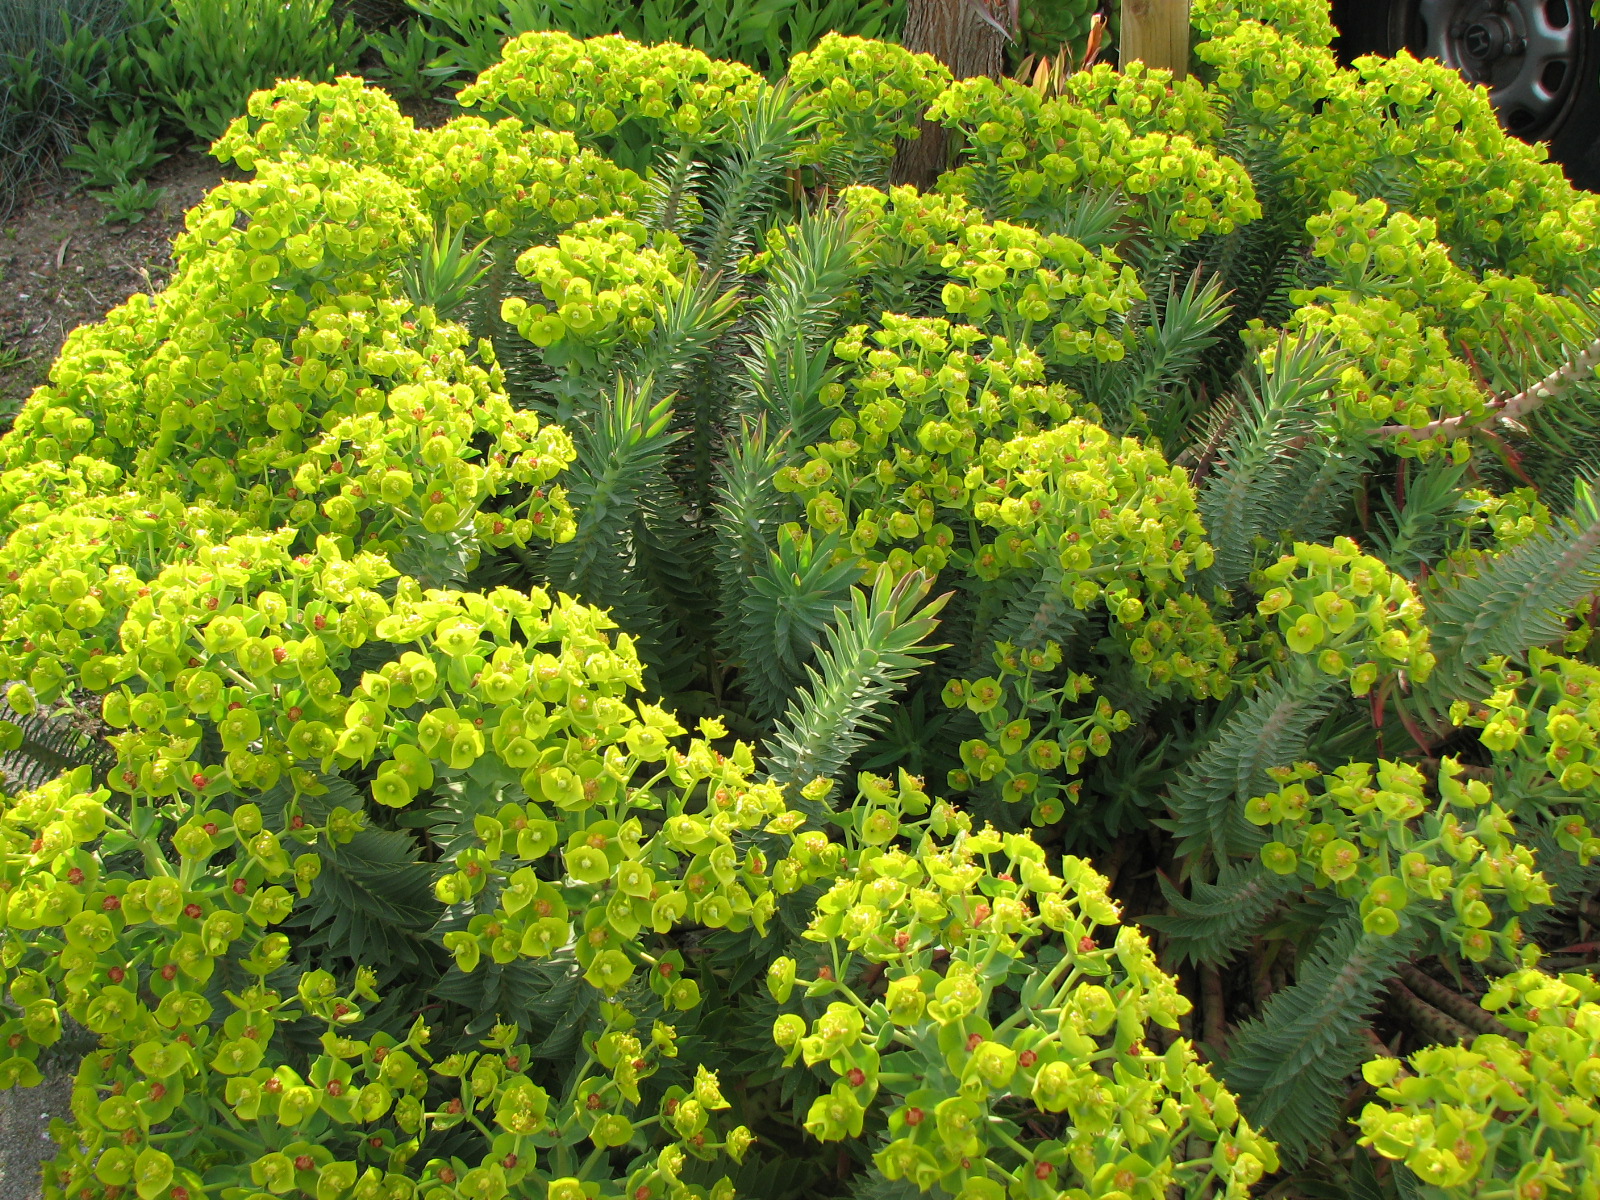 a group of plants with yellow flowers in a garden